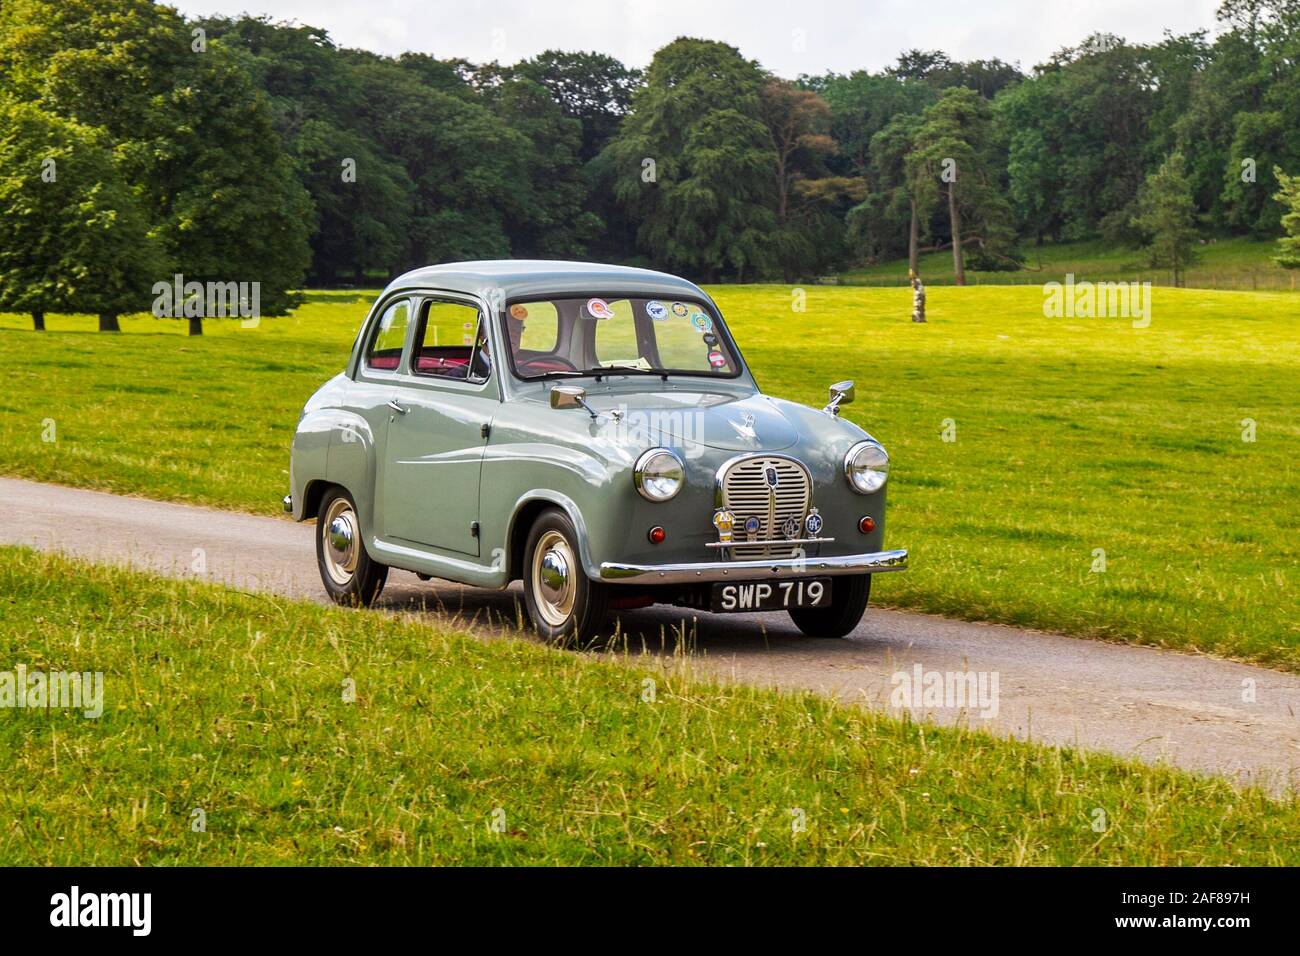 1957 50s fifties grey Austin A35;  Classic cars, historics, cherished, old timers, collectable restored vintage veteran, heritage vehicles of yesteryear arriving for the Mark Woodward historical motoring event at Leighton Hall, Carnforth, UK Stock Photo